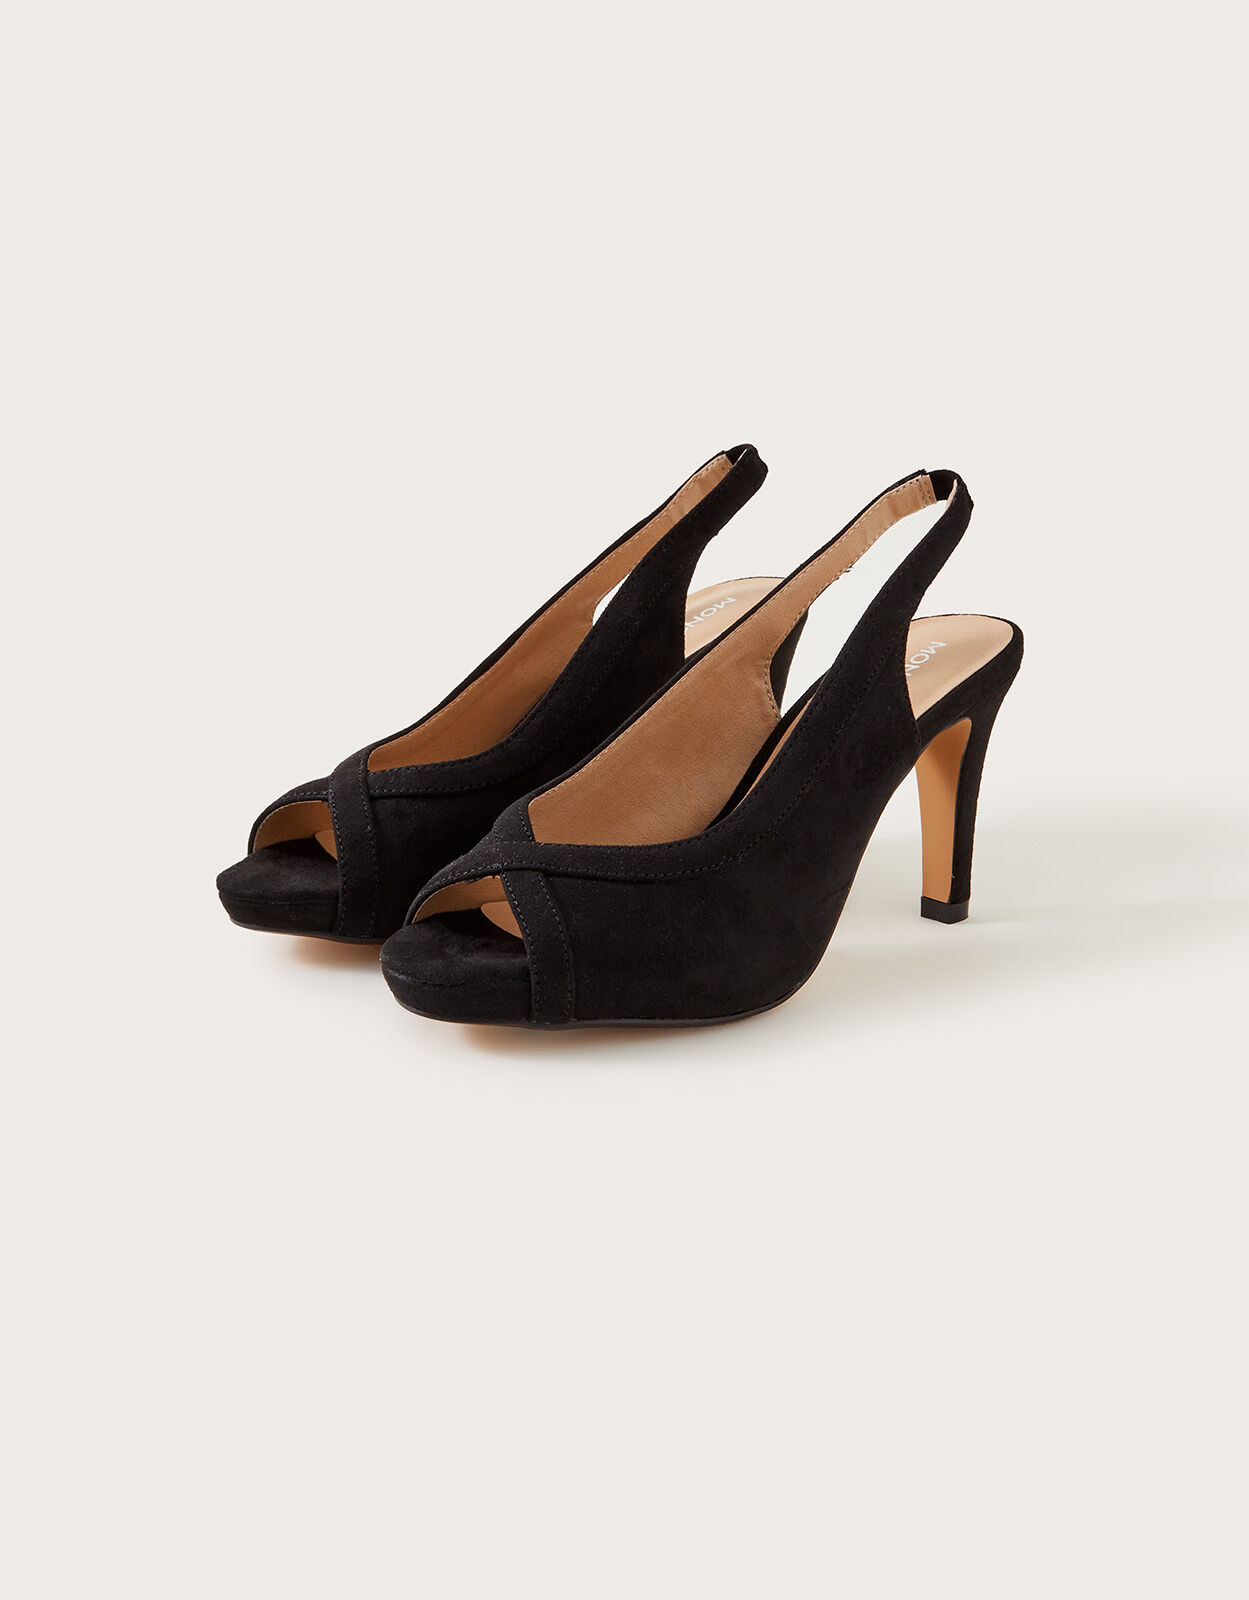 Shoes Chase + Chloe Green Suede High Heel With Bow | Retro Betty